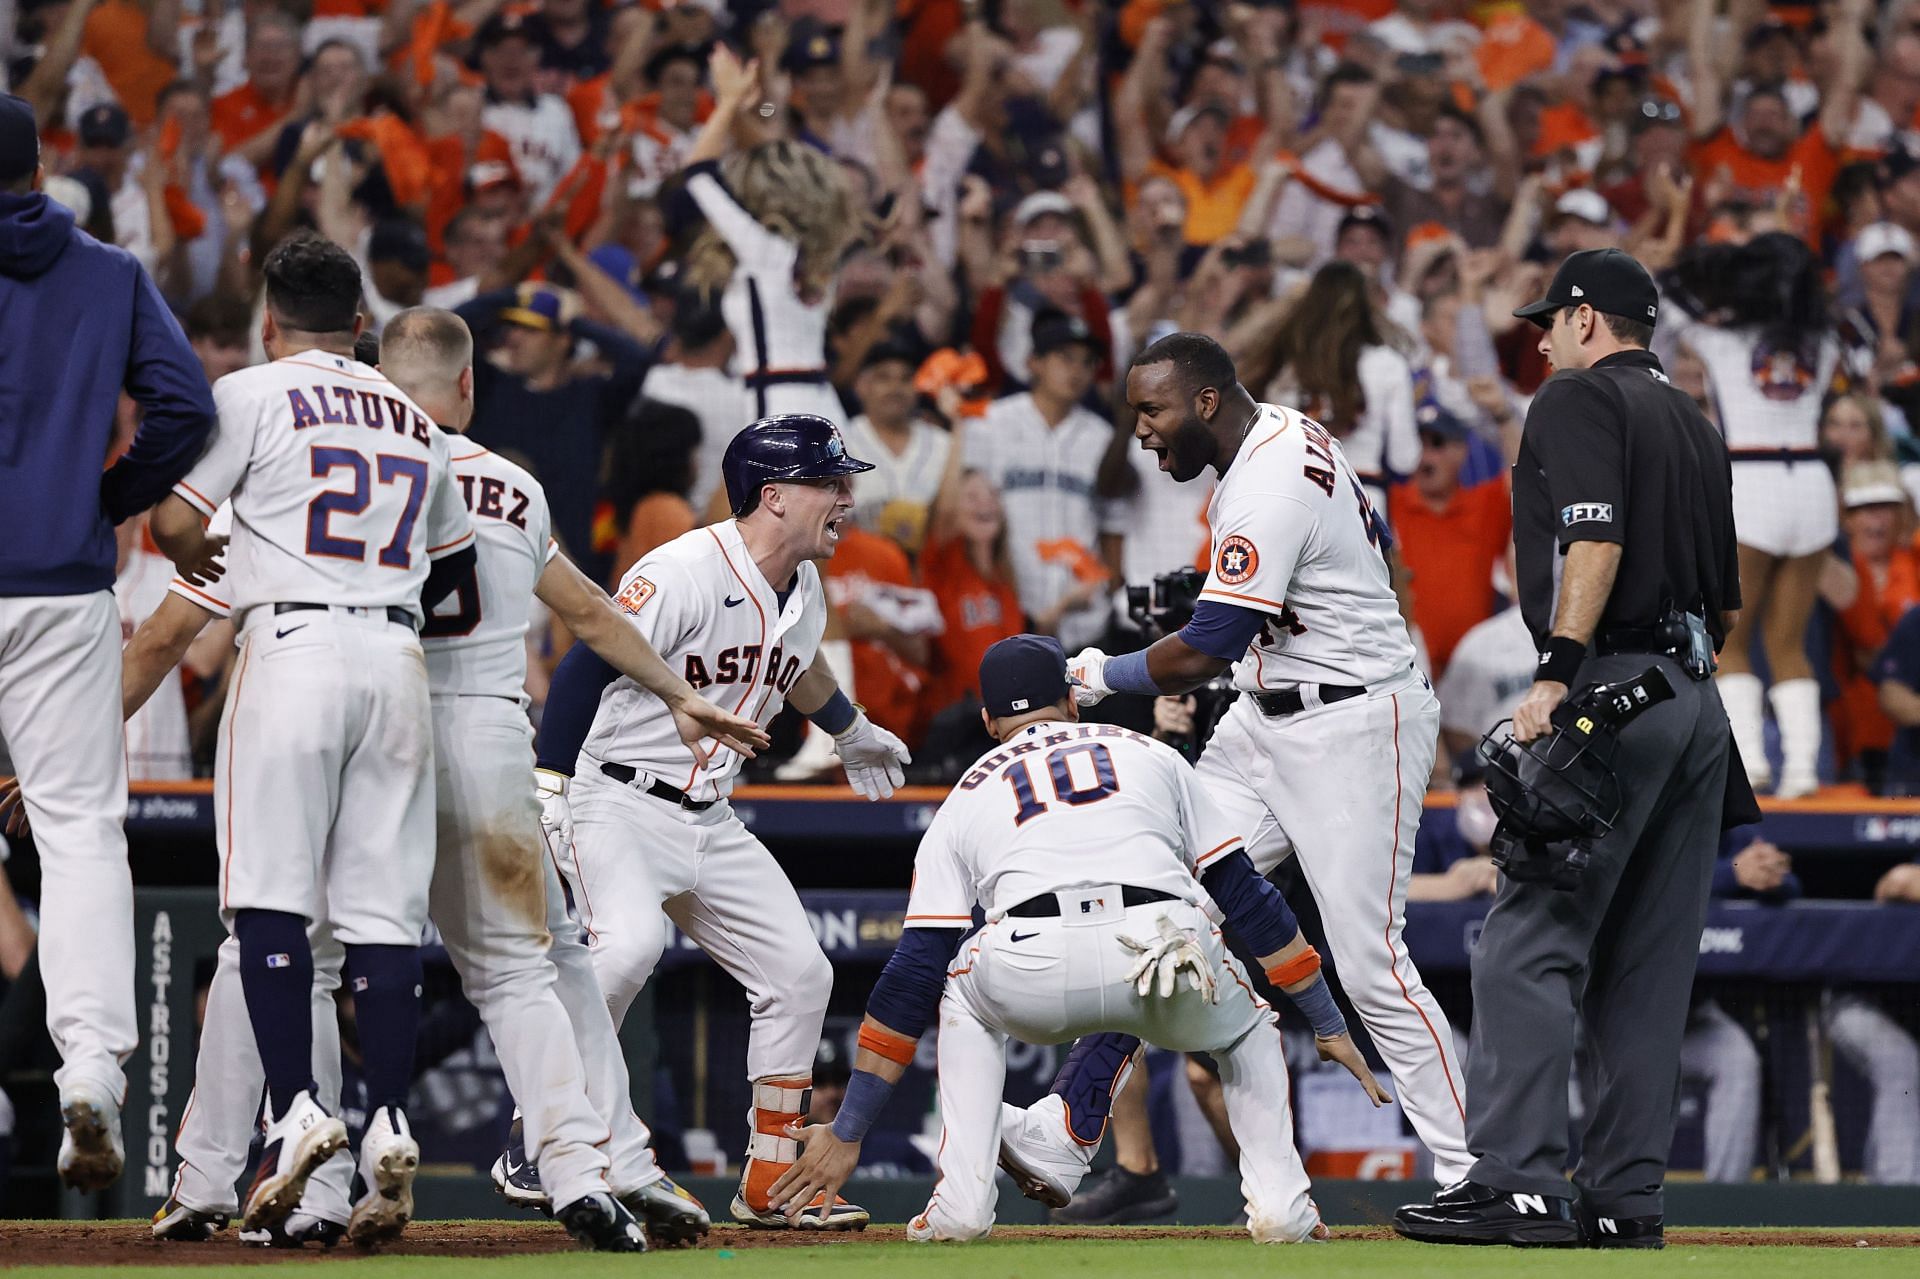 Astros walk off with win over Mariners in Game 1